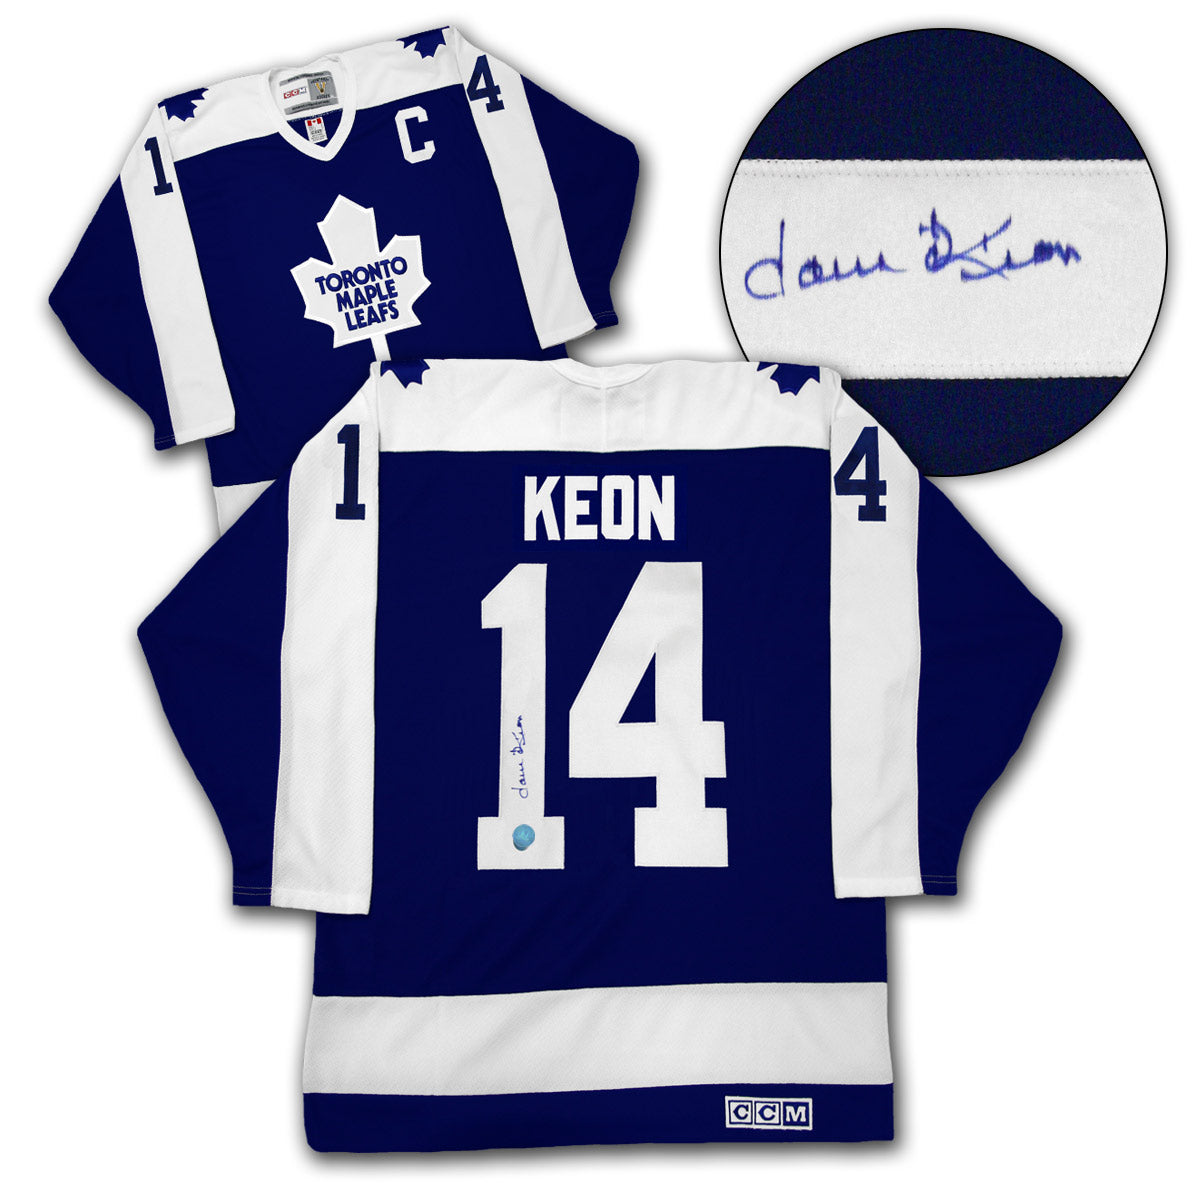 Darryl Sittler Toronto Maple Leafs Signed & Dated 1st Goal Vintage CCM  Jersey - Autographed NHL Jerseys at 's Sports Collectibles Store